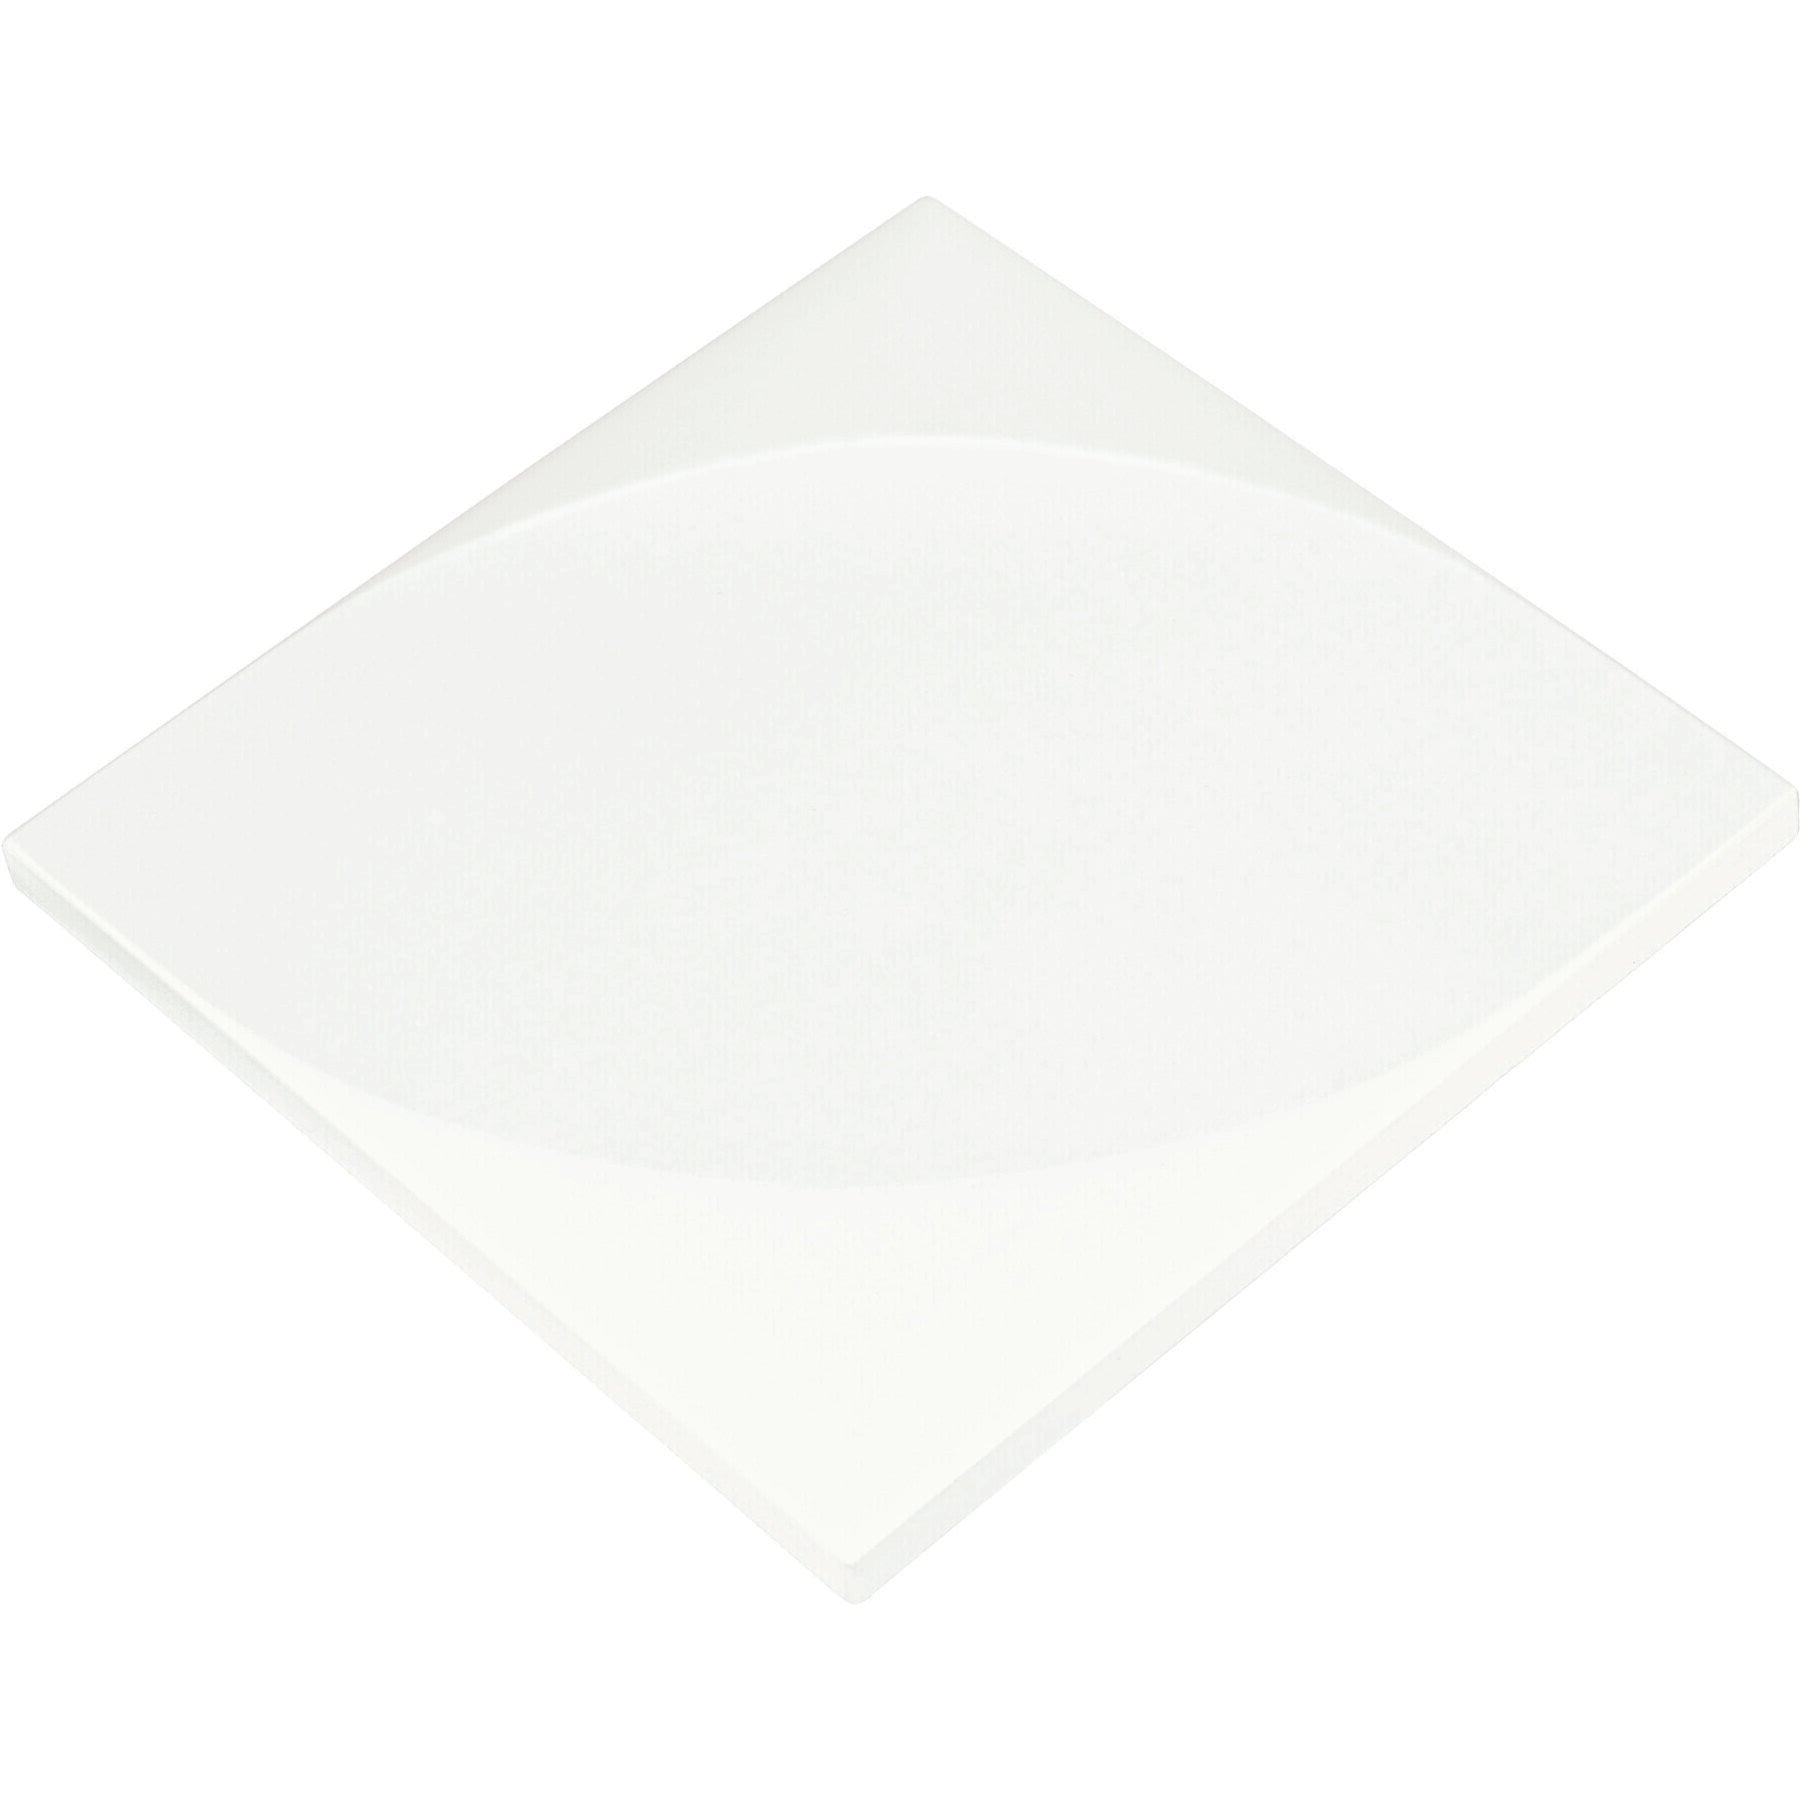 Daltile - STARE™ Collection - Electric 6 in. x 6 in. Tile - Petal Joule White